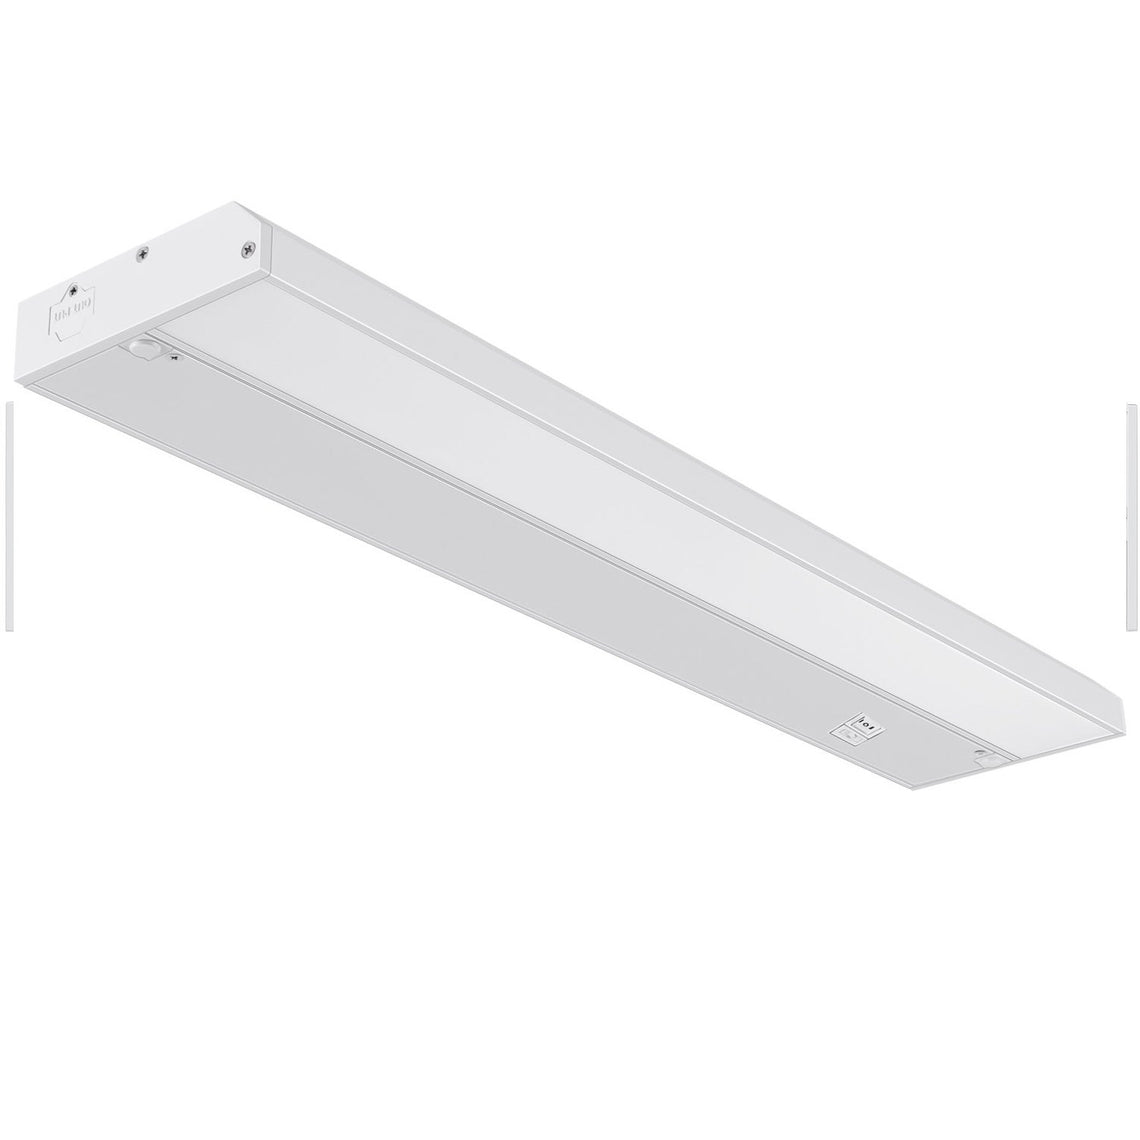 LED Under Cabinet Light Dimmable CRI90, WHITE, Direct Plug-in, Color Changeable (3000K/4000K/5000K)